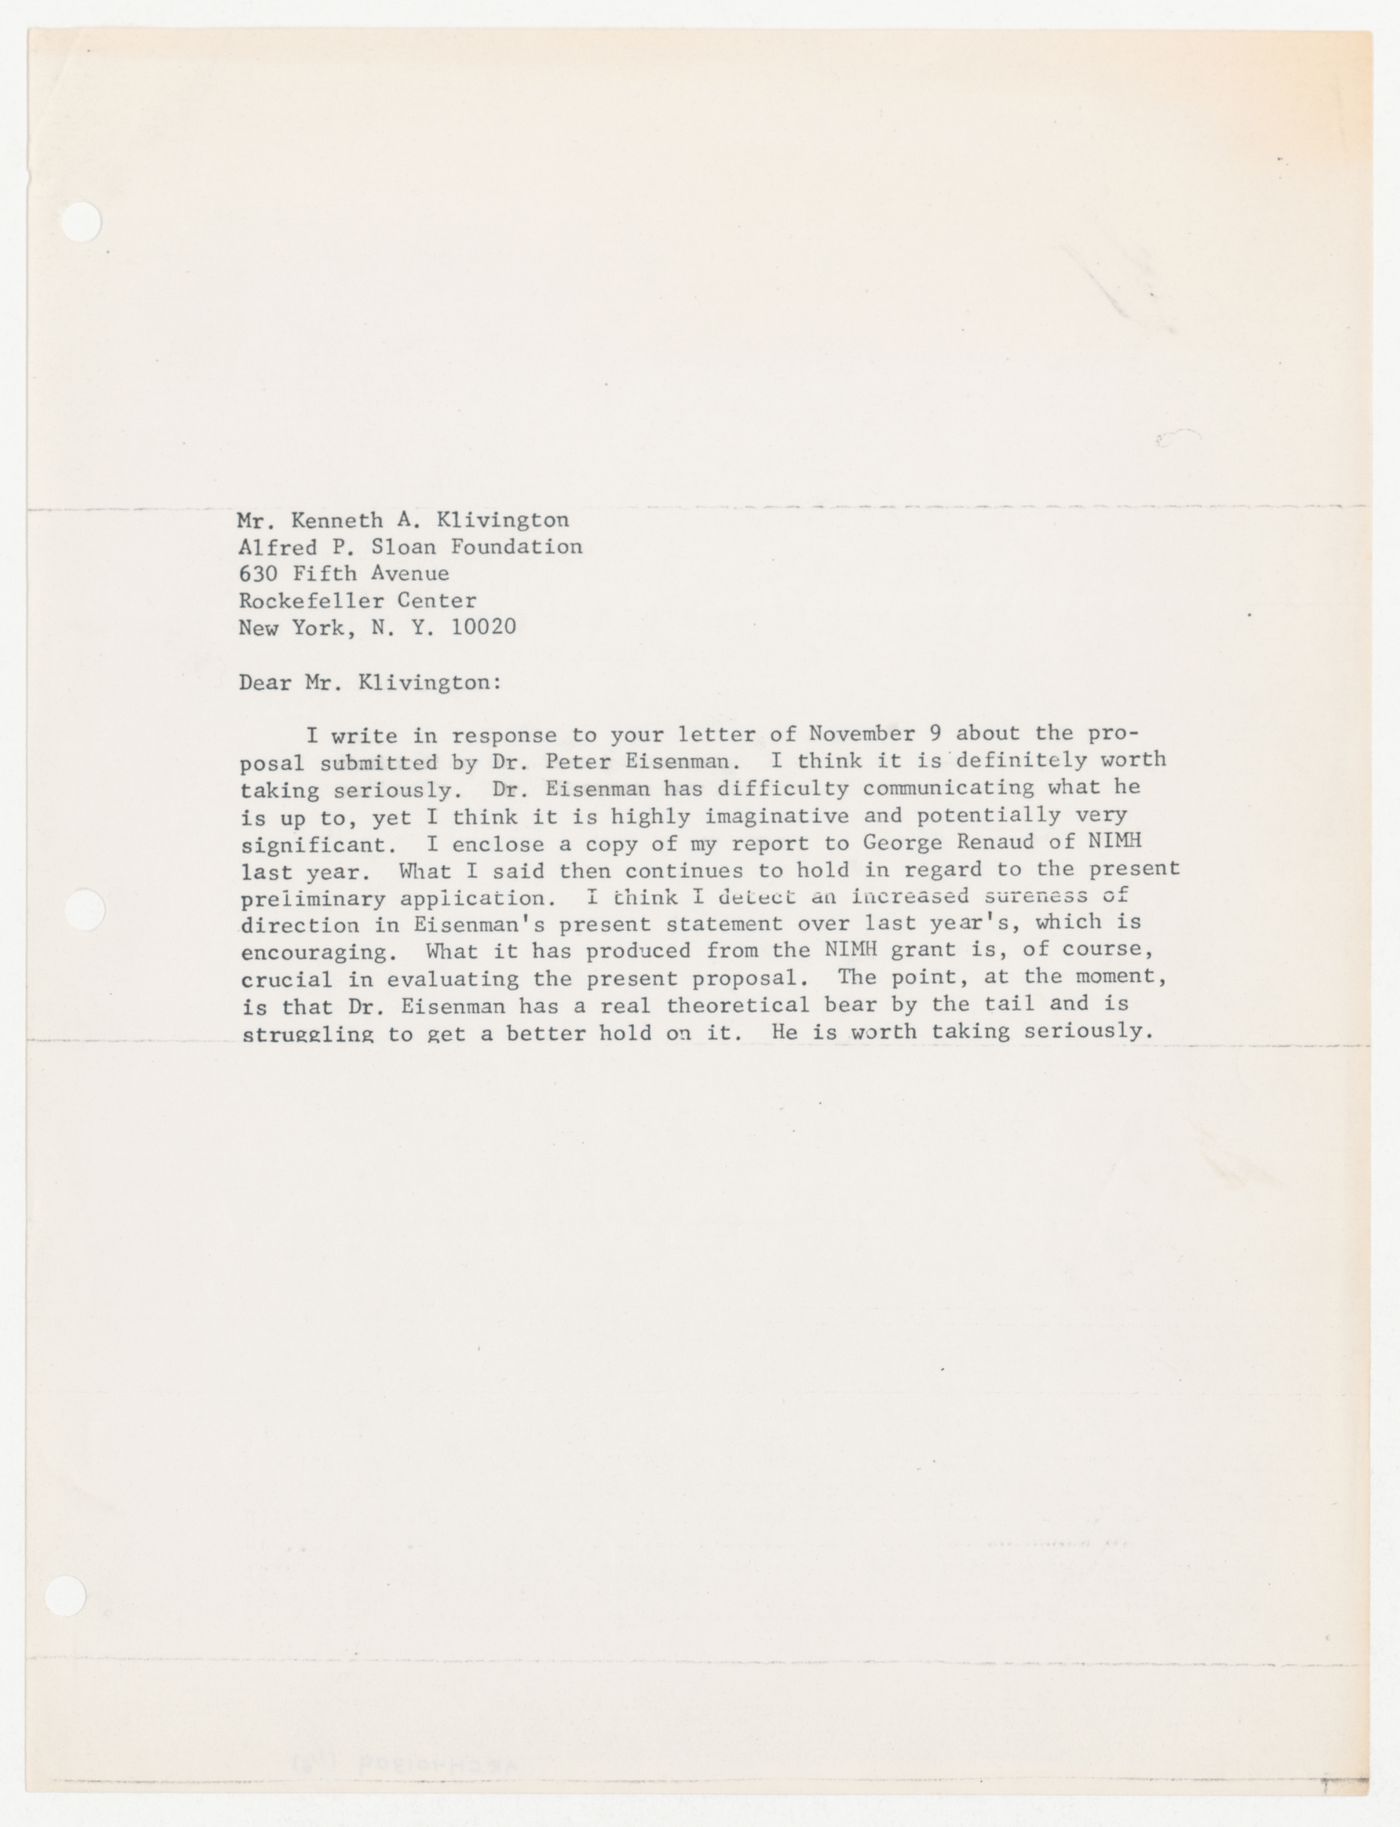 Draft letters to Kenneth A. Klivington about support for Program in Generative Design